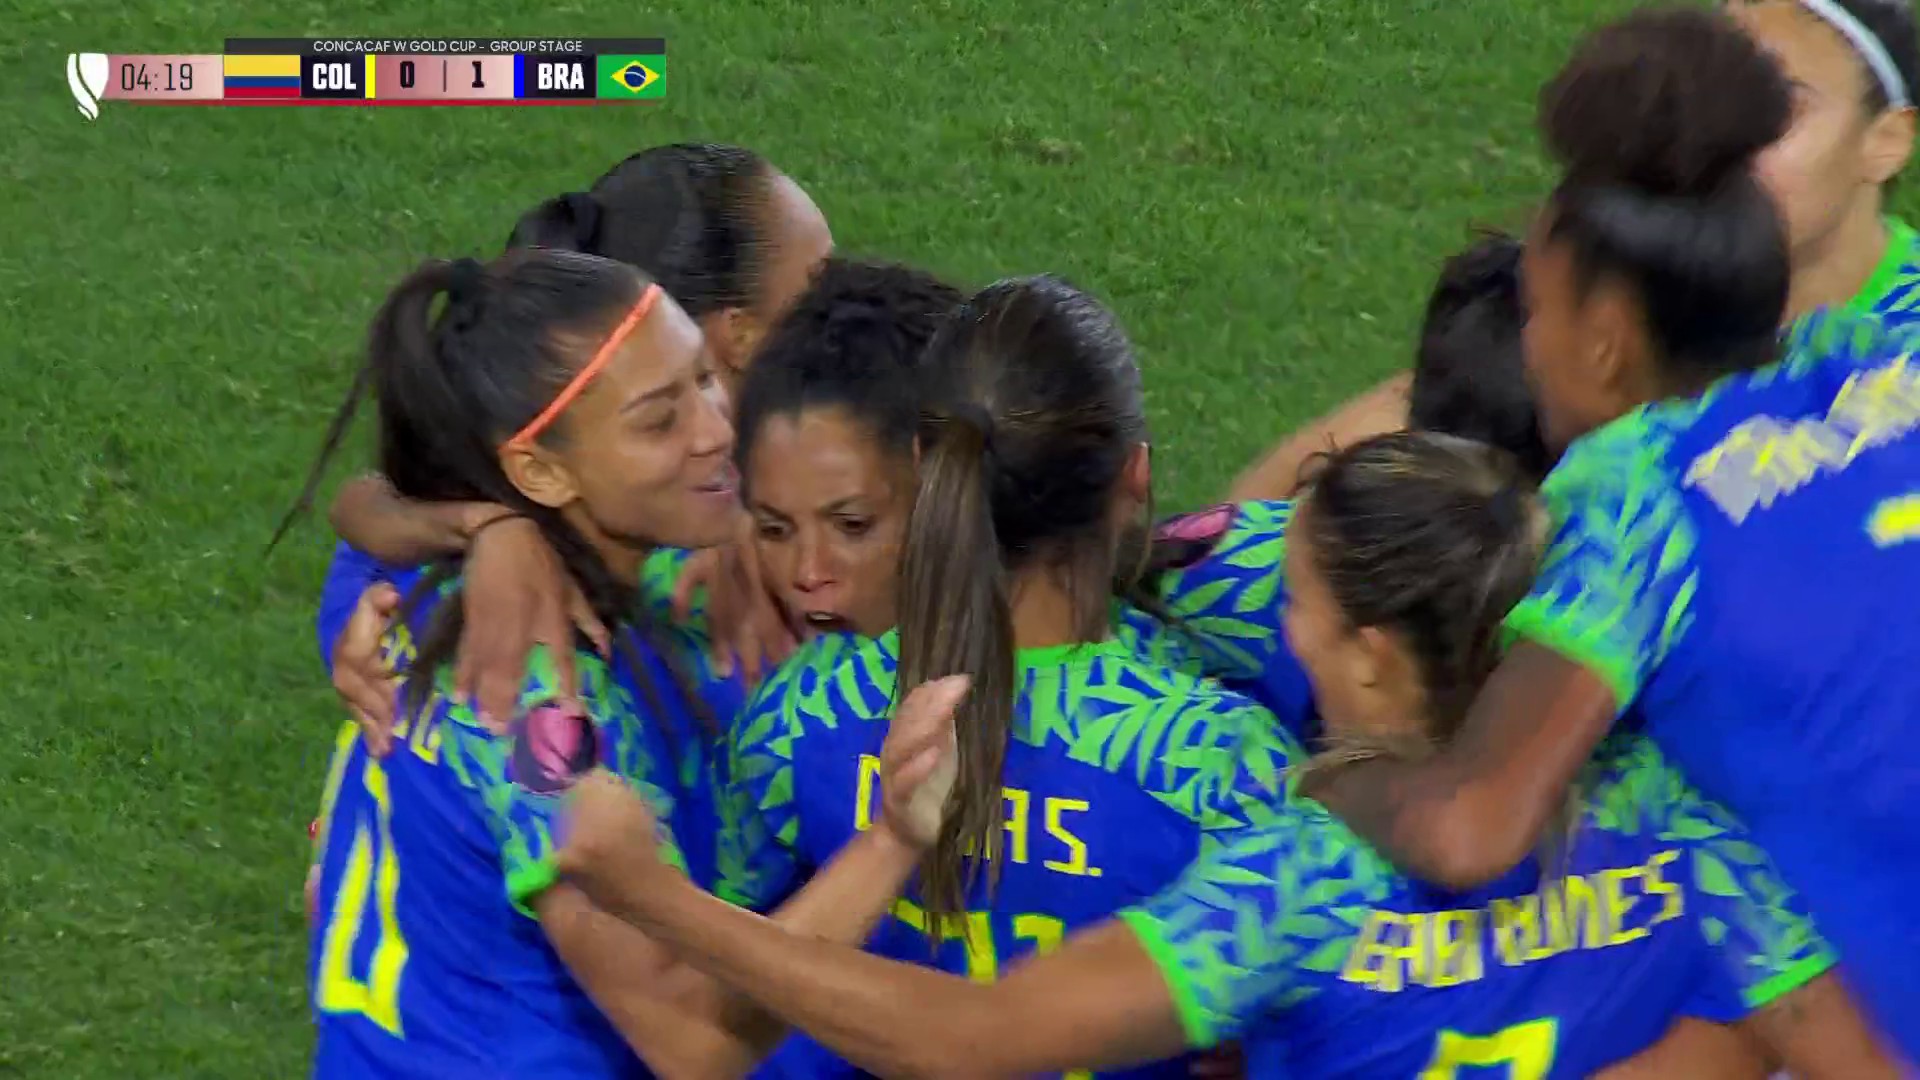 Brazil strikes fast to go up early in the match!